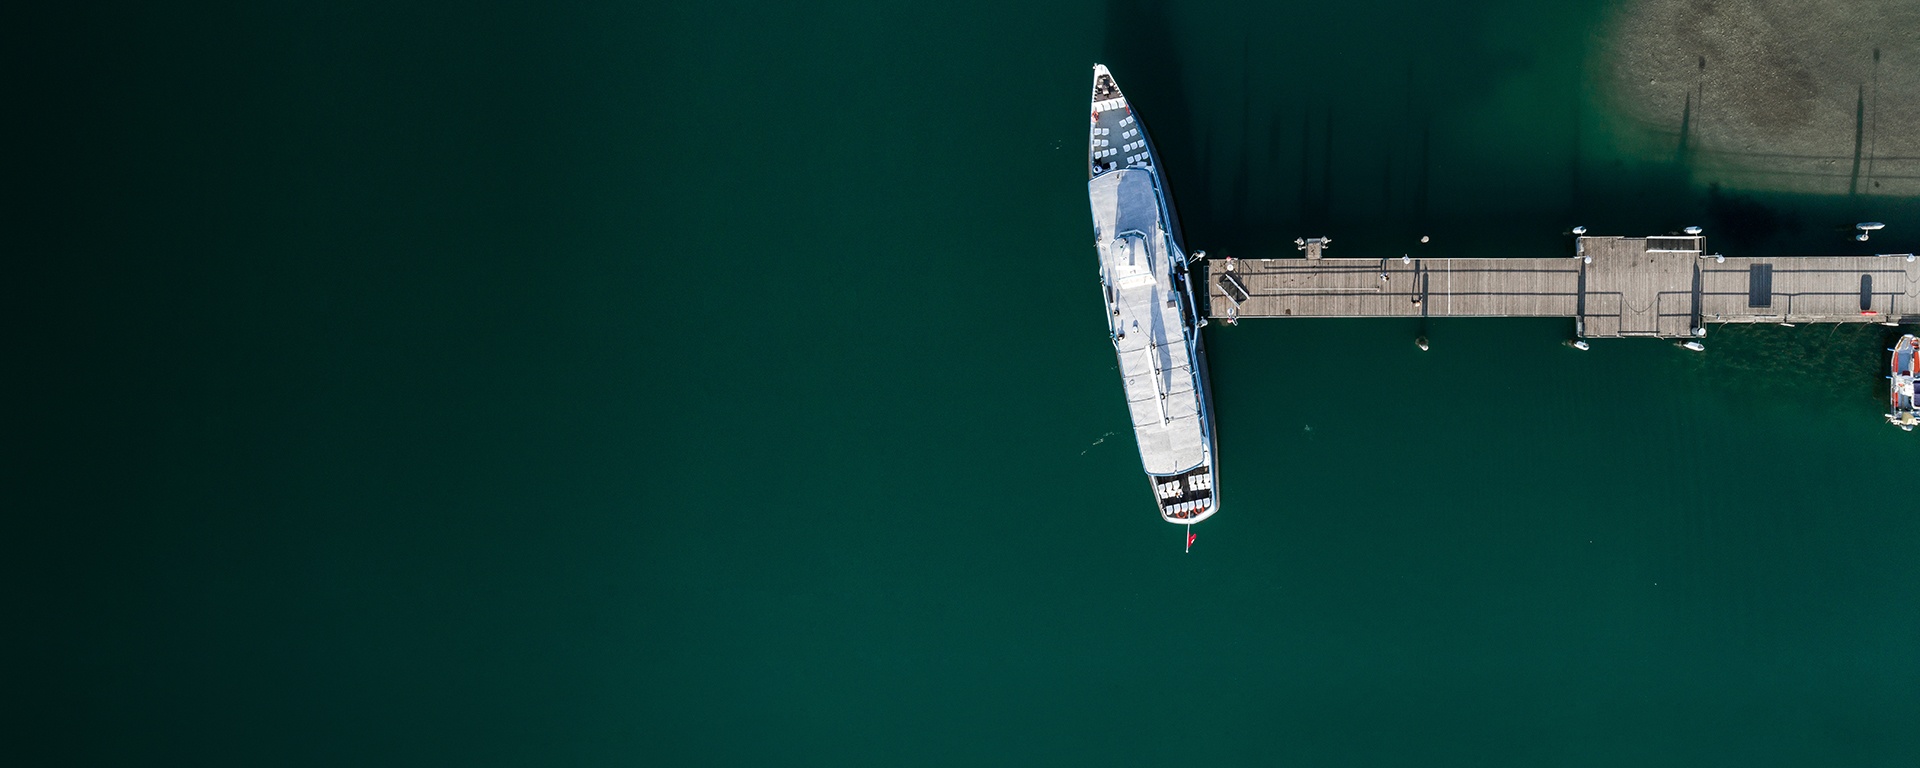 A large ship is anchored at a pier. Photo from a bird's eye view.